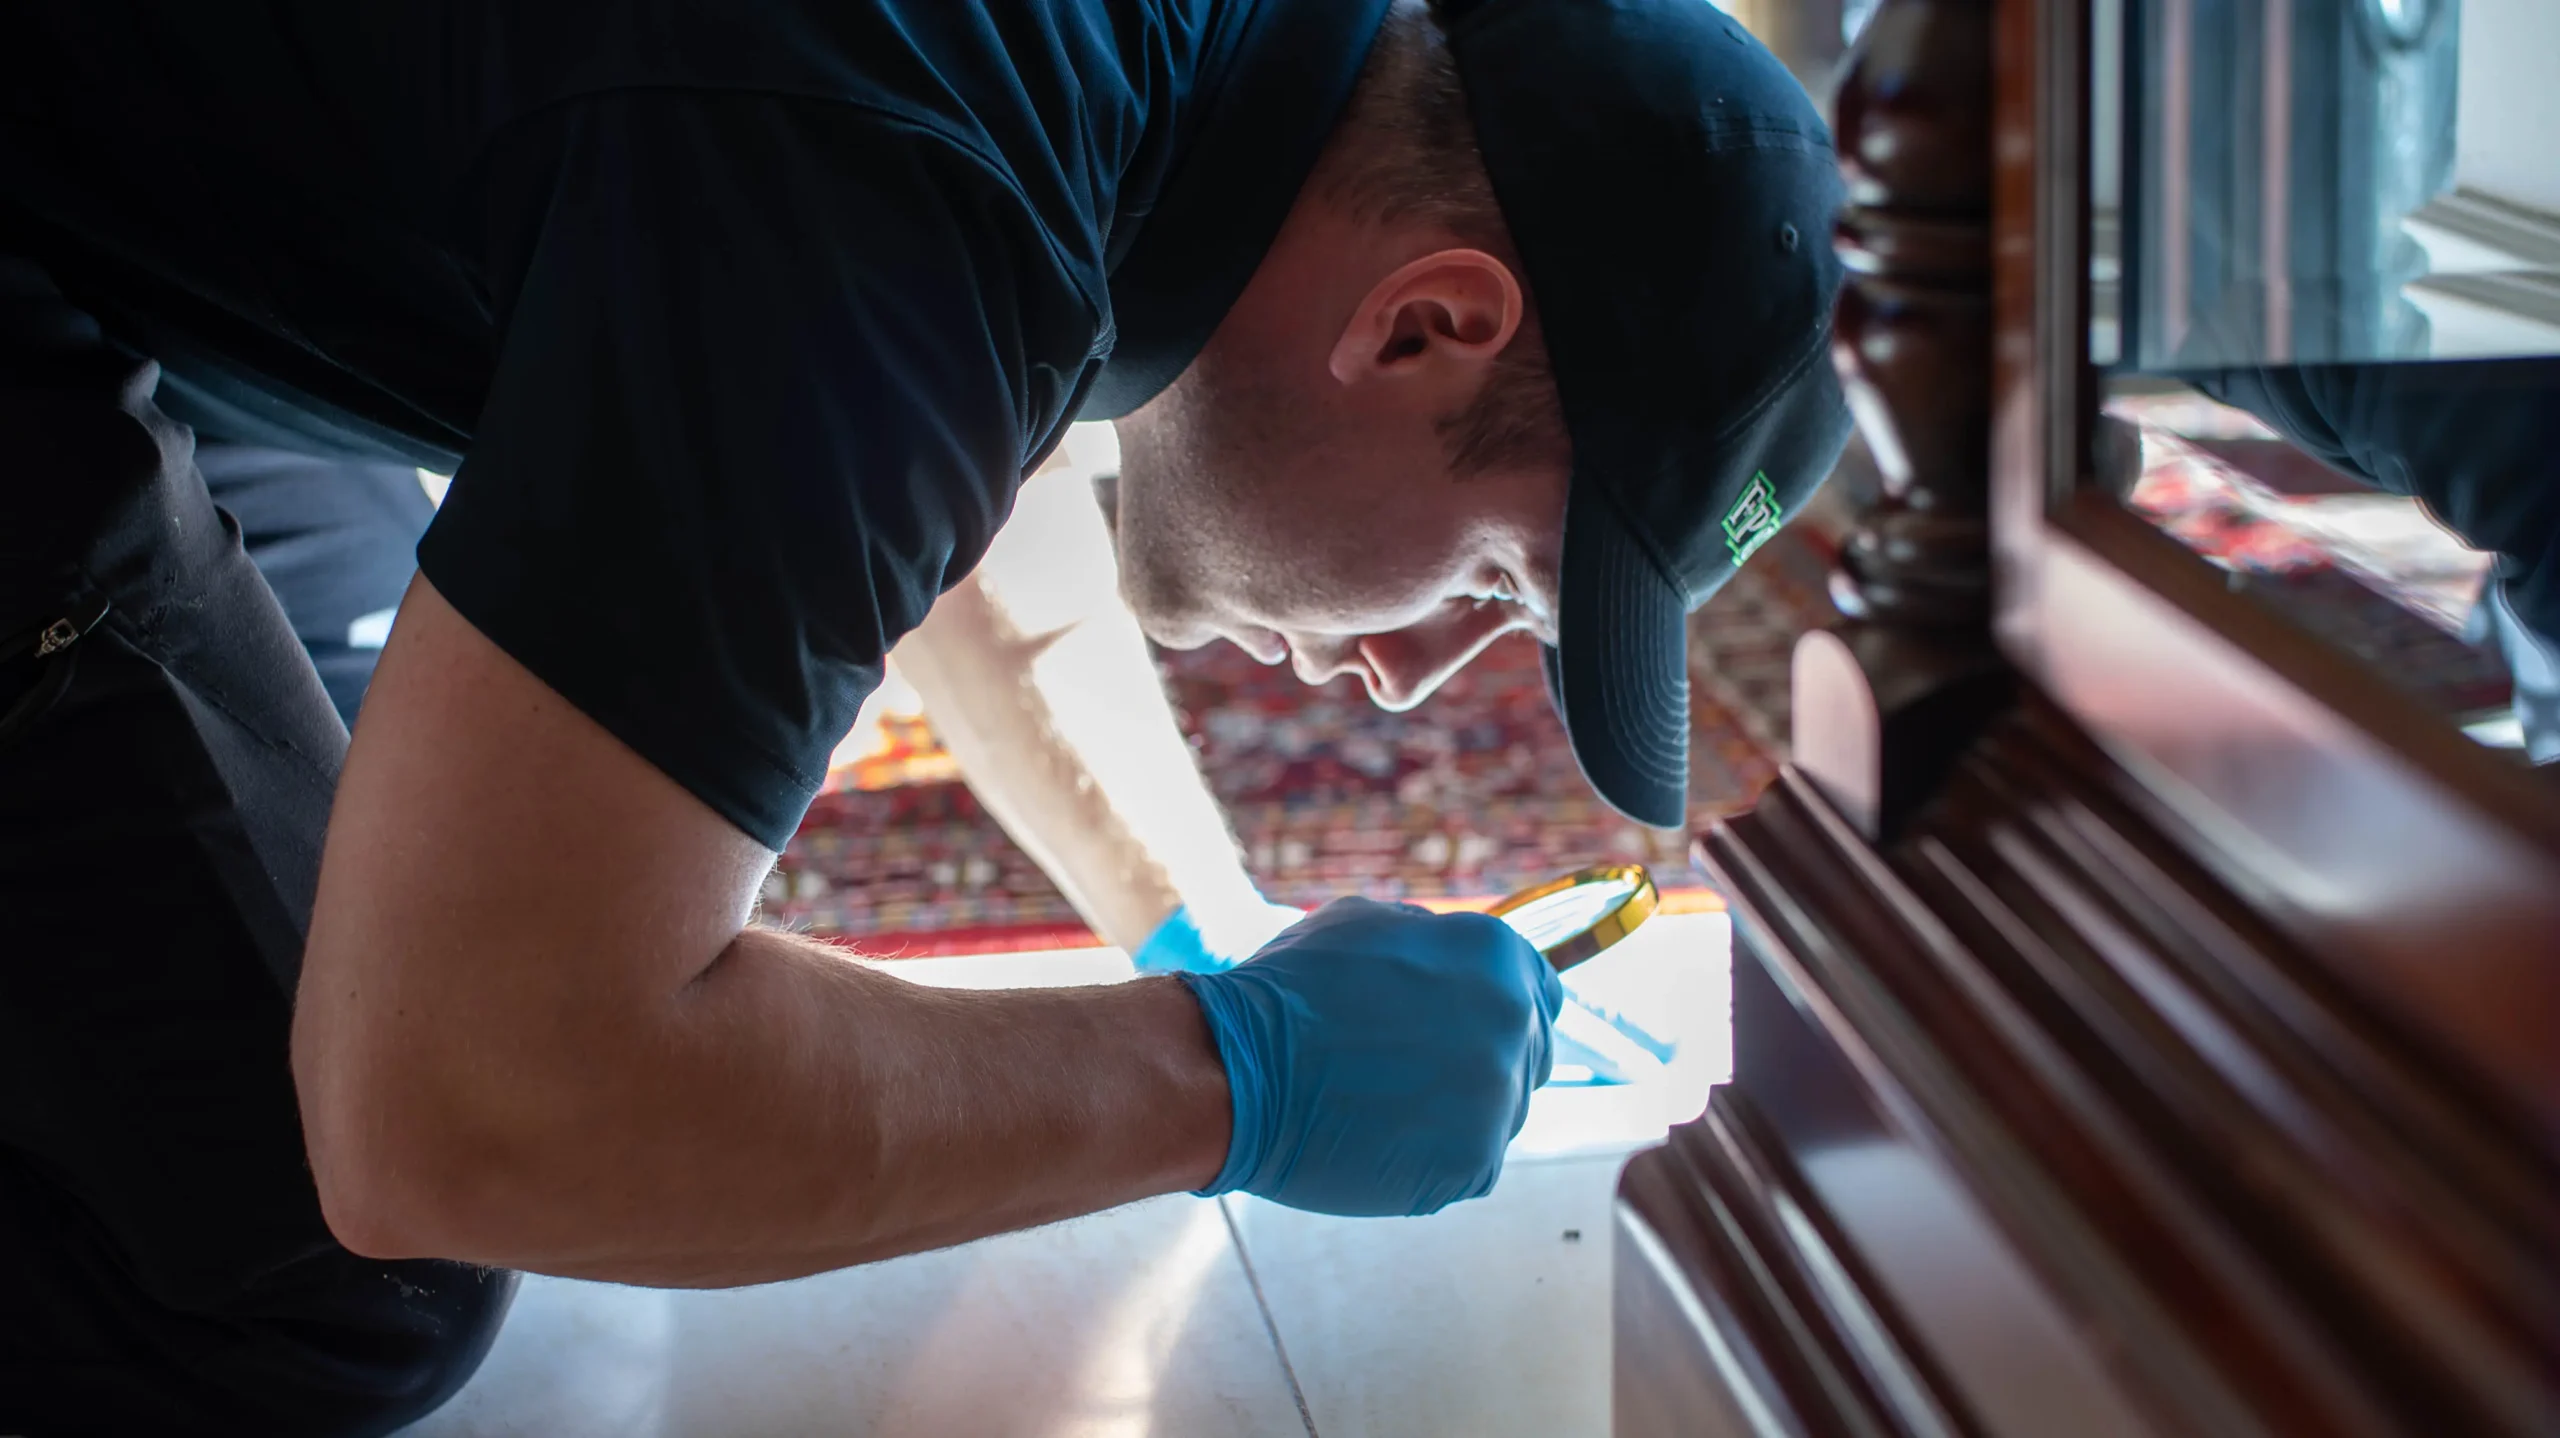 Pest Control Provider: On Choosing the Right One-Forbearance Pest Control-technician in blue uniform inspecting cracks on the floor